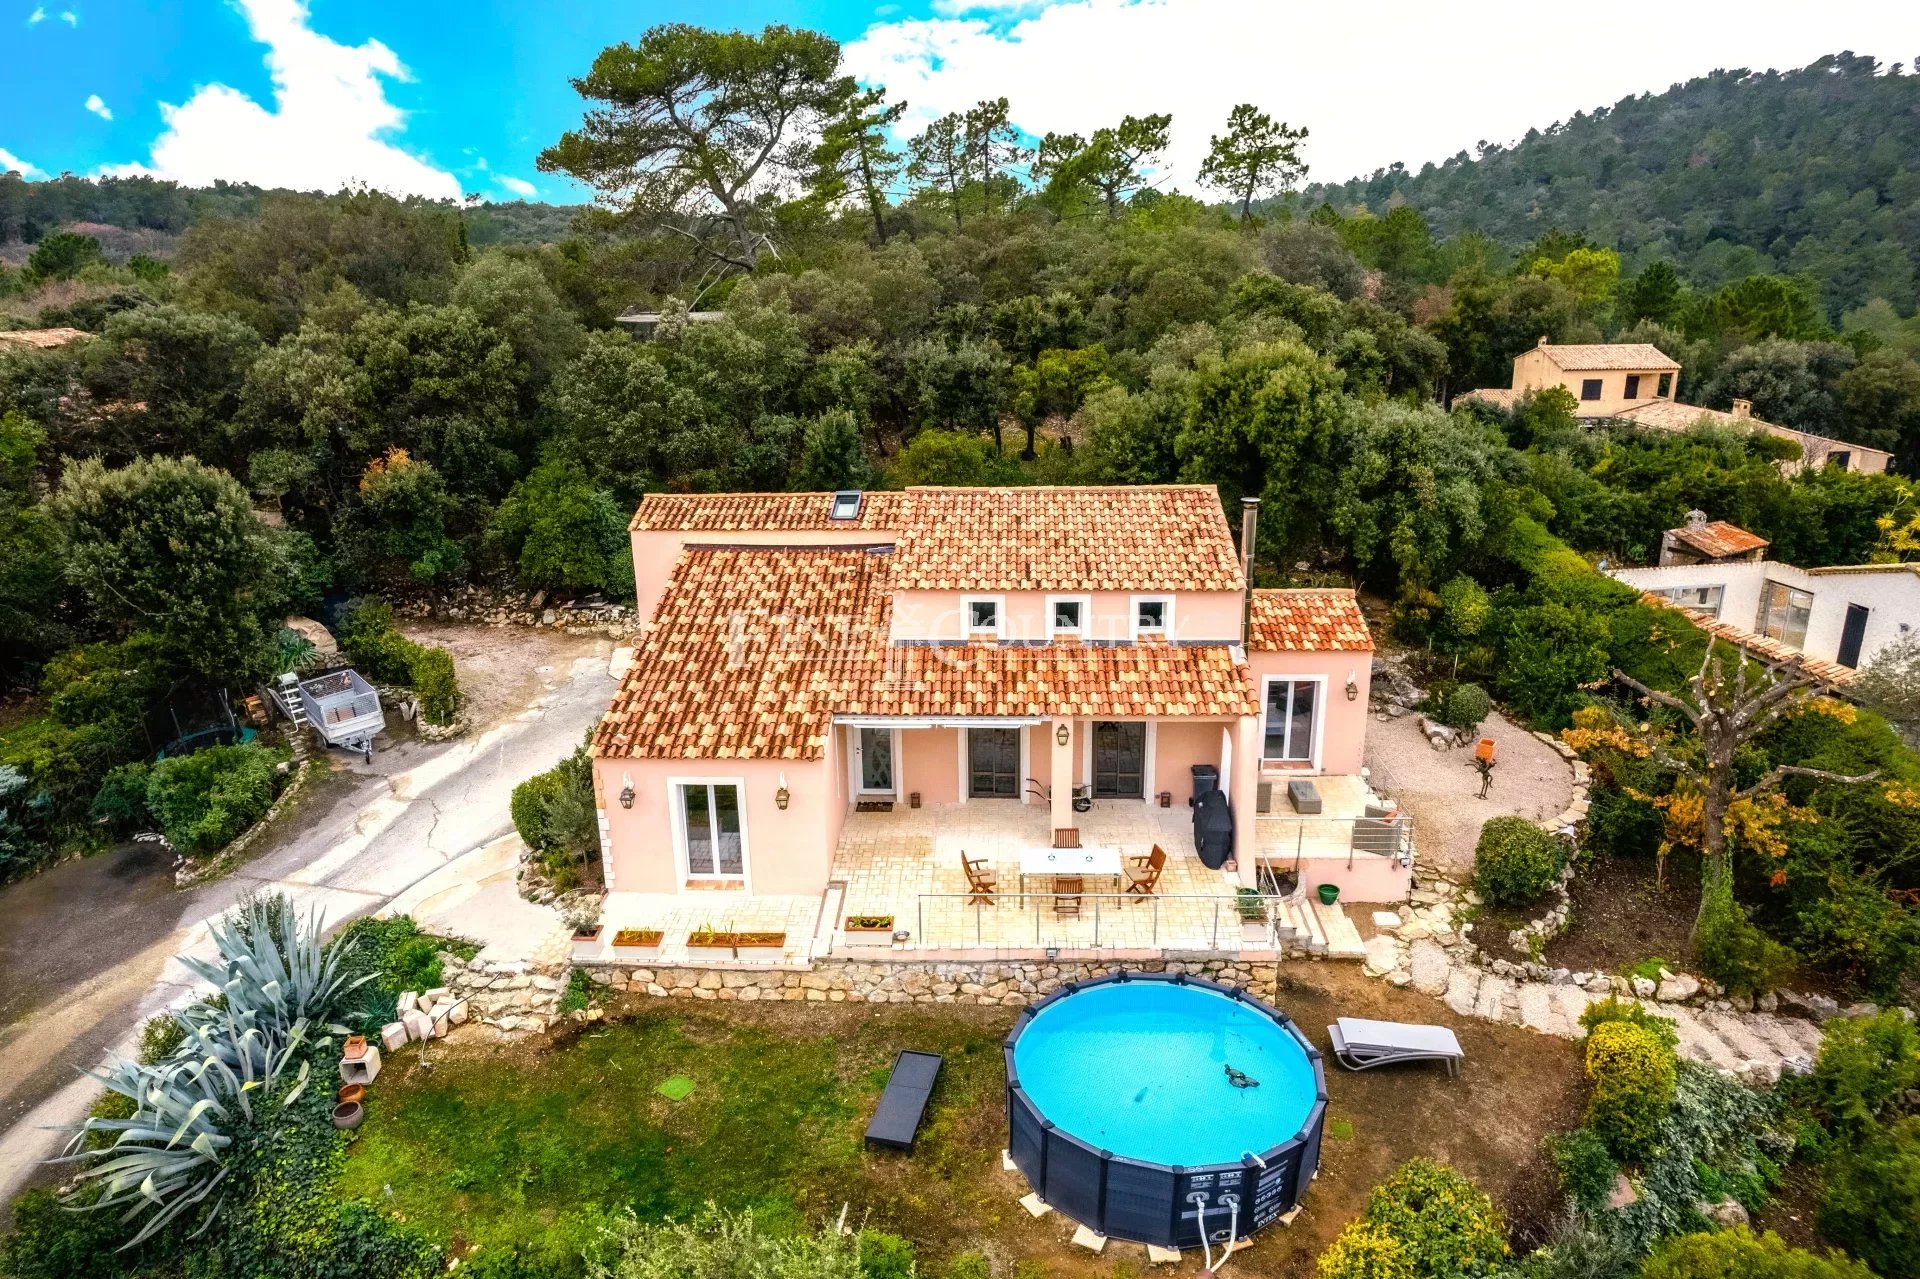 Villa For Sale in Montauroux with parnoramic view Accommodation in Cannes